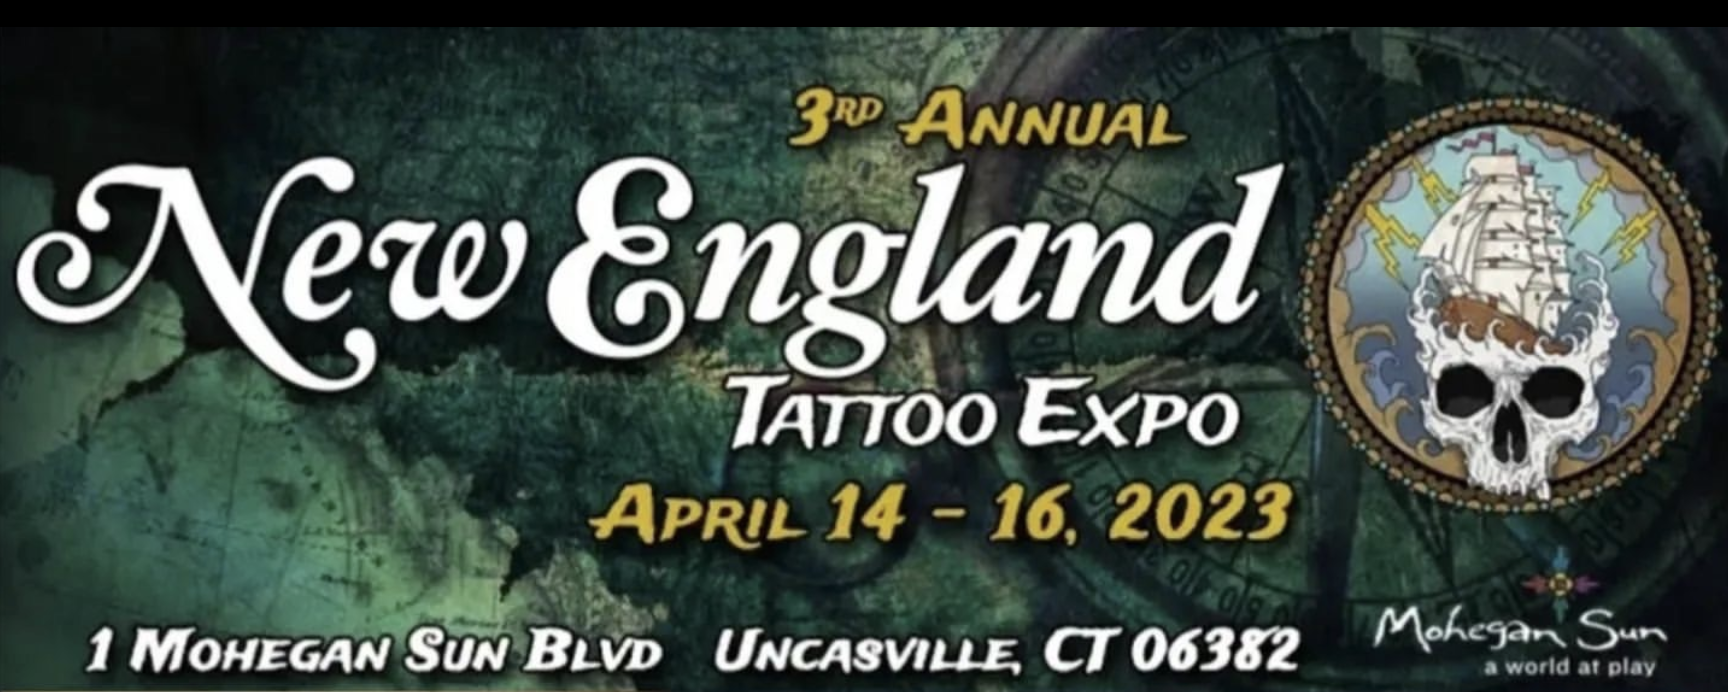 Anna Hasseltine on Instagram Todays the day Come visit me at the  ashandivorytattoo booth at the villainarts Chicago Tattoo Convention We  are booth 282  283 If